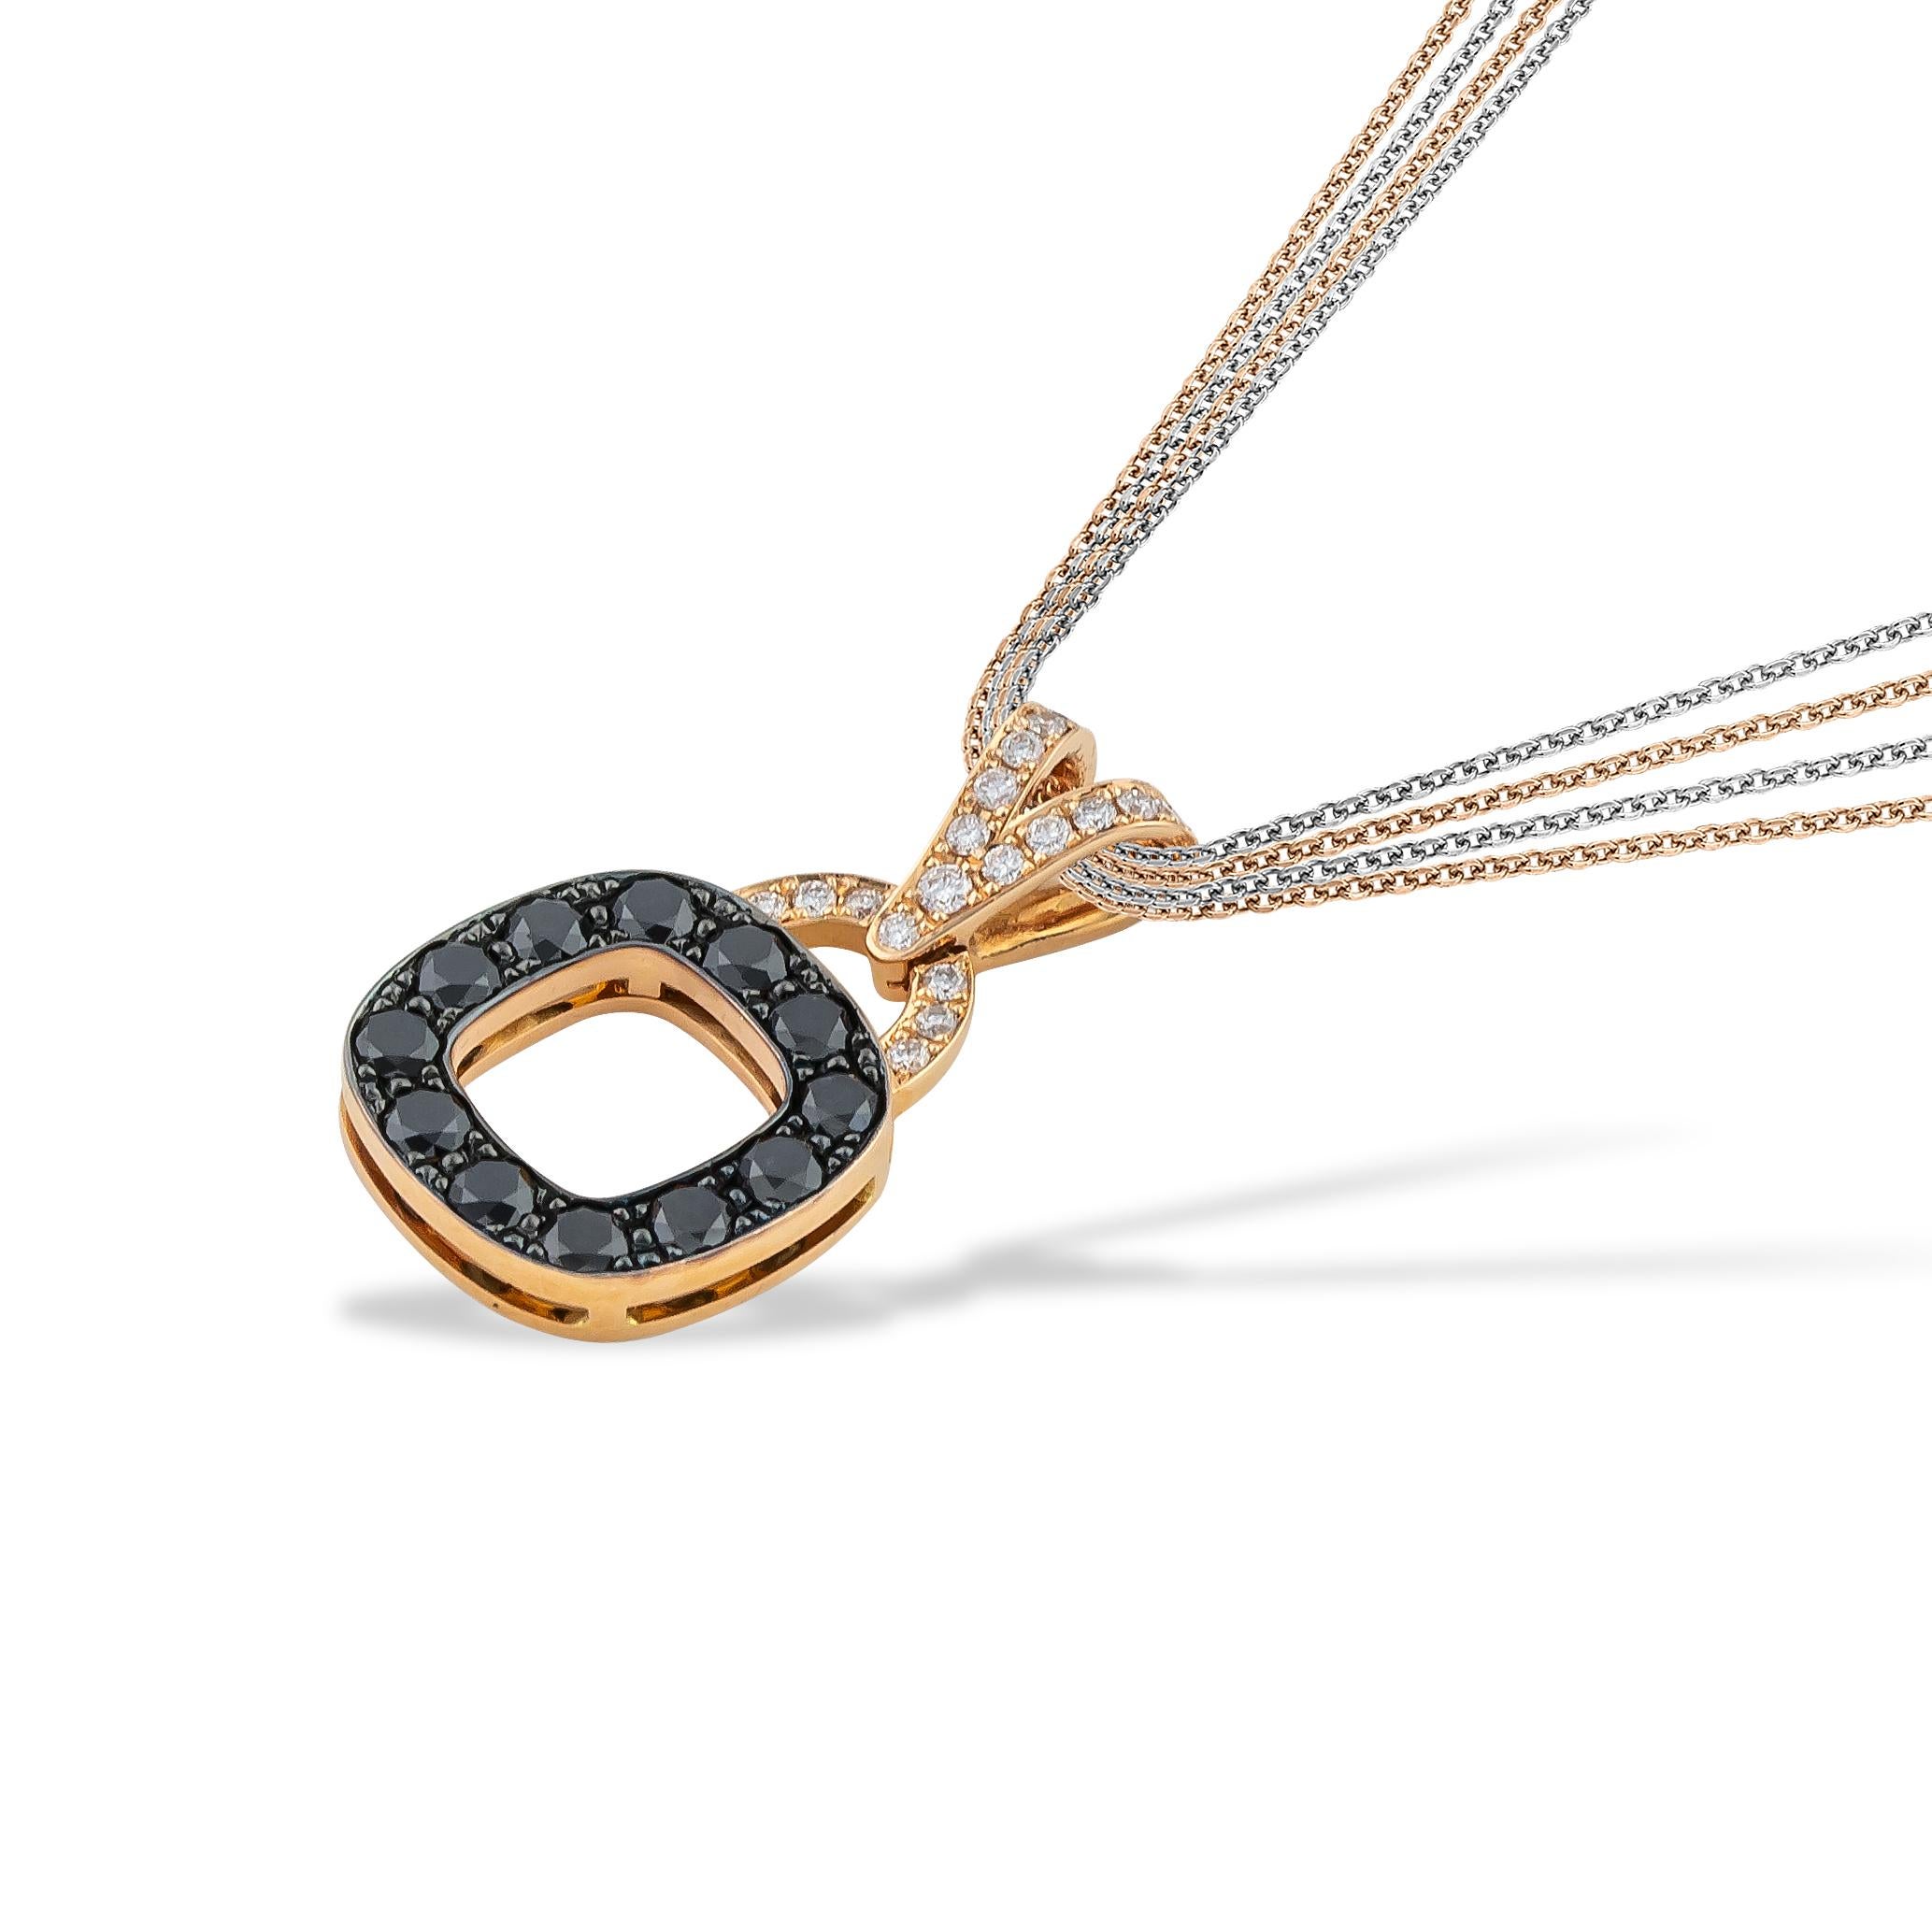 Rounded Square Black and White Pave Diamonds Pendant Necklace in 18kt Rose Gold. This diamond masterpiece comes with Multi Chain ( 2x rose and 2x white gold diamond cut rolo chain). This necklace belongs to 